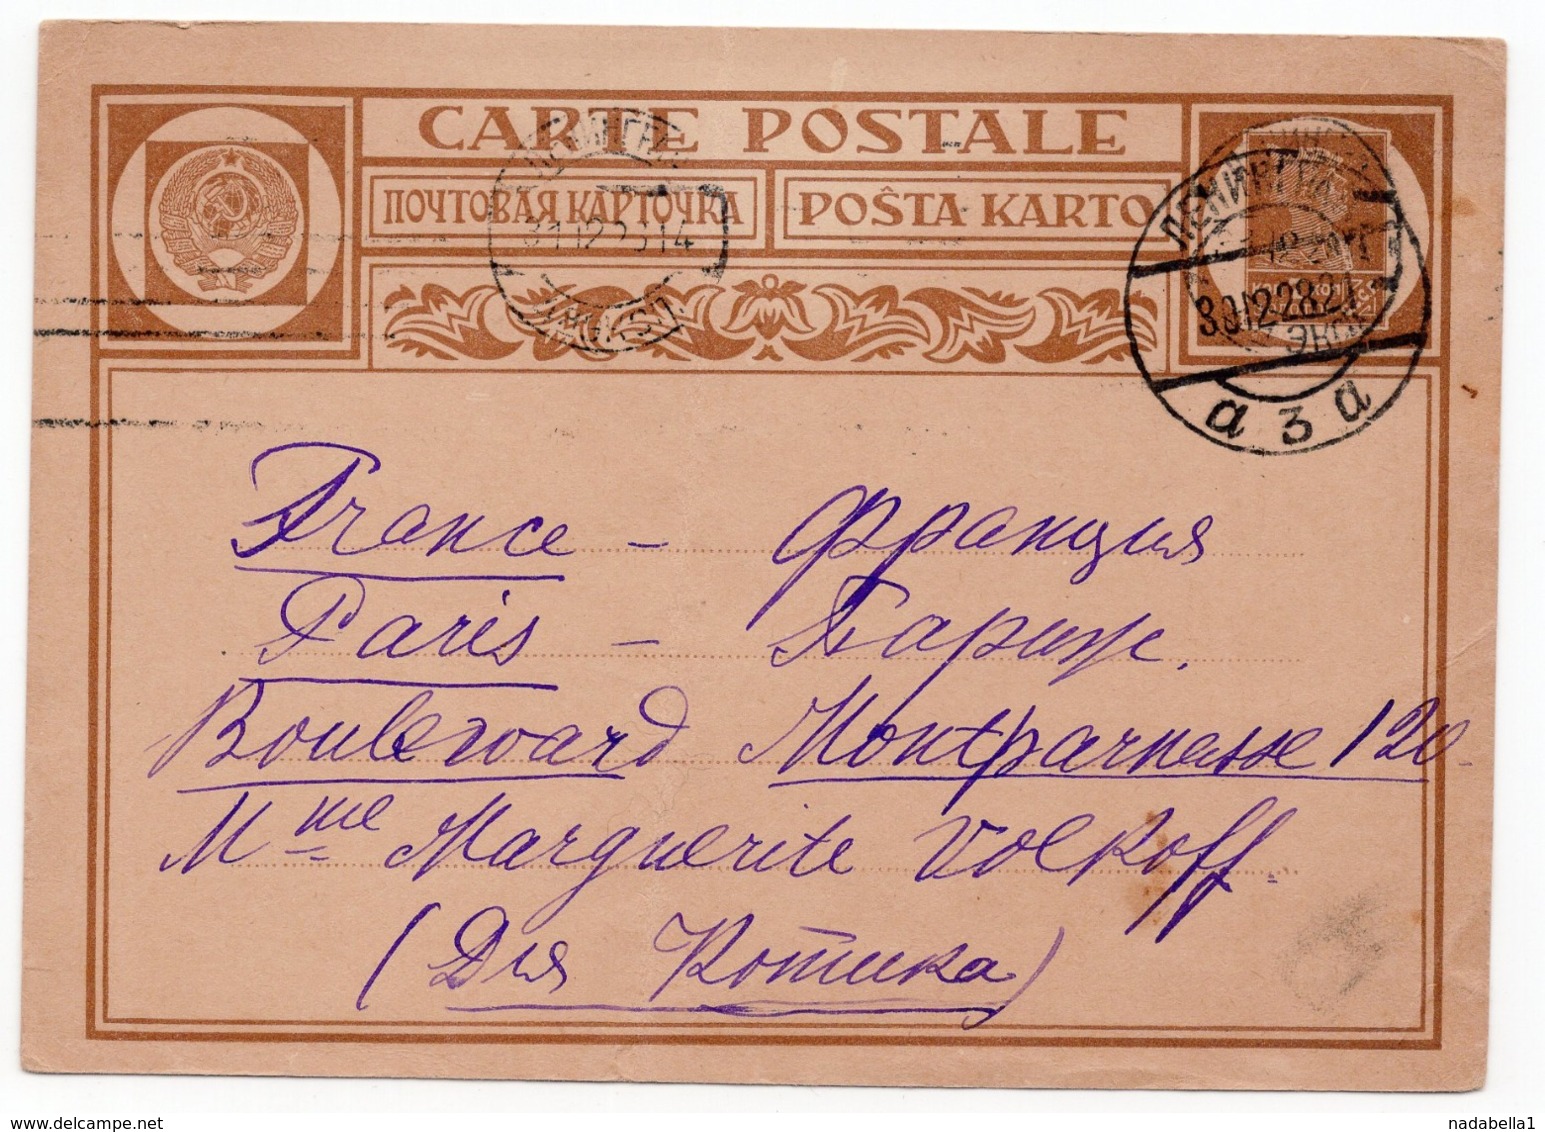 1928 RUSSIA, LENINGRAD TO PARIS, FRANCE, STATIONERY CARD, USED - ...-1949